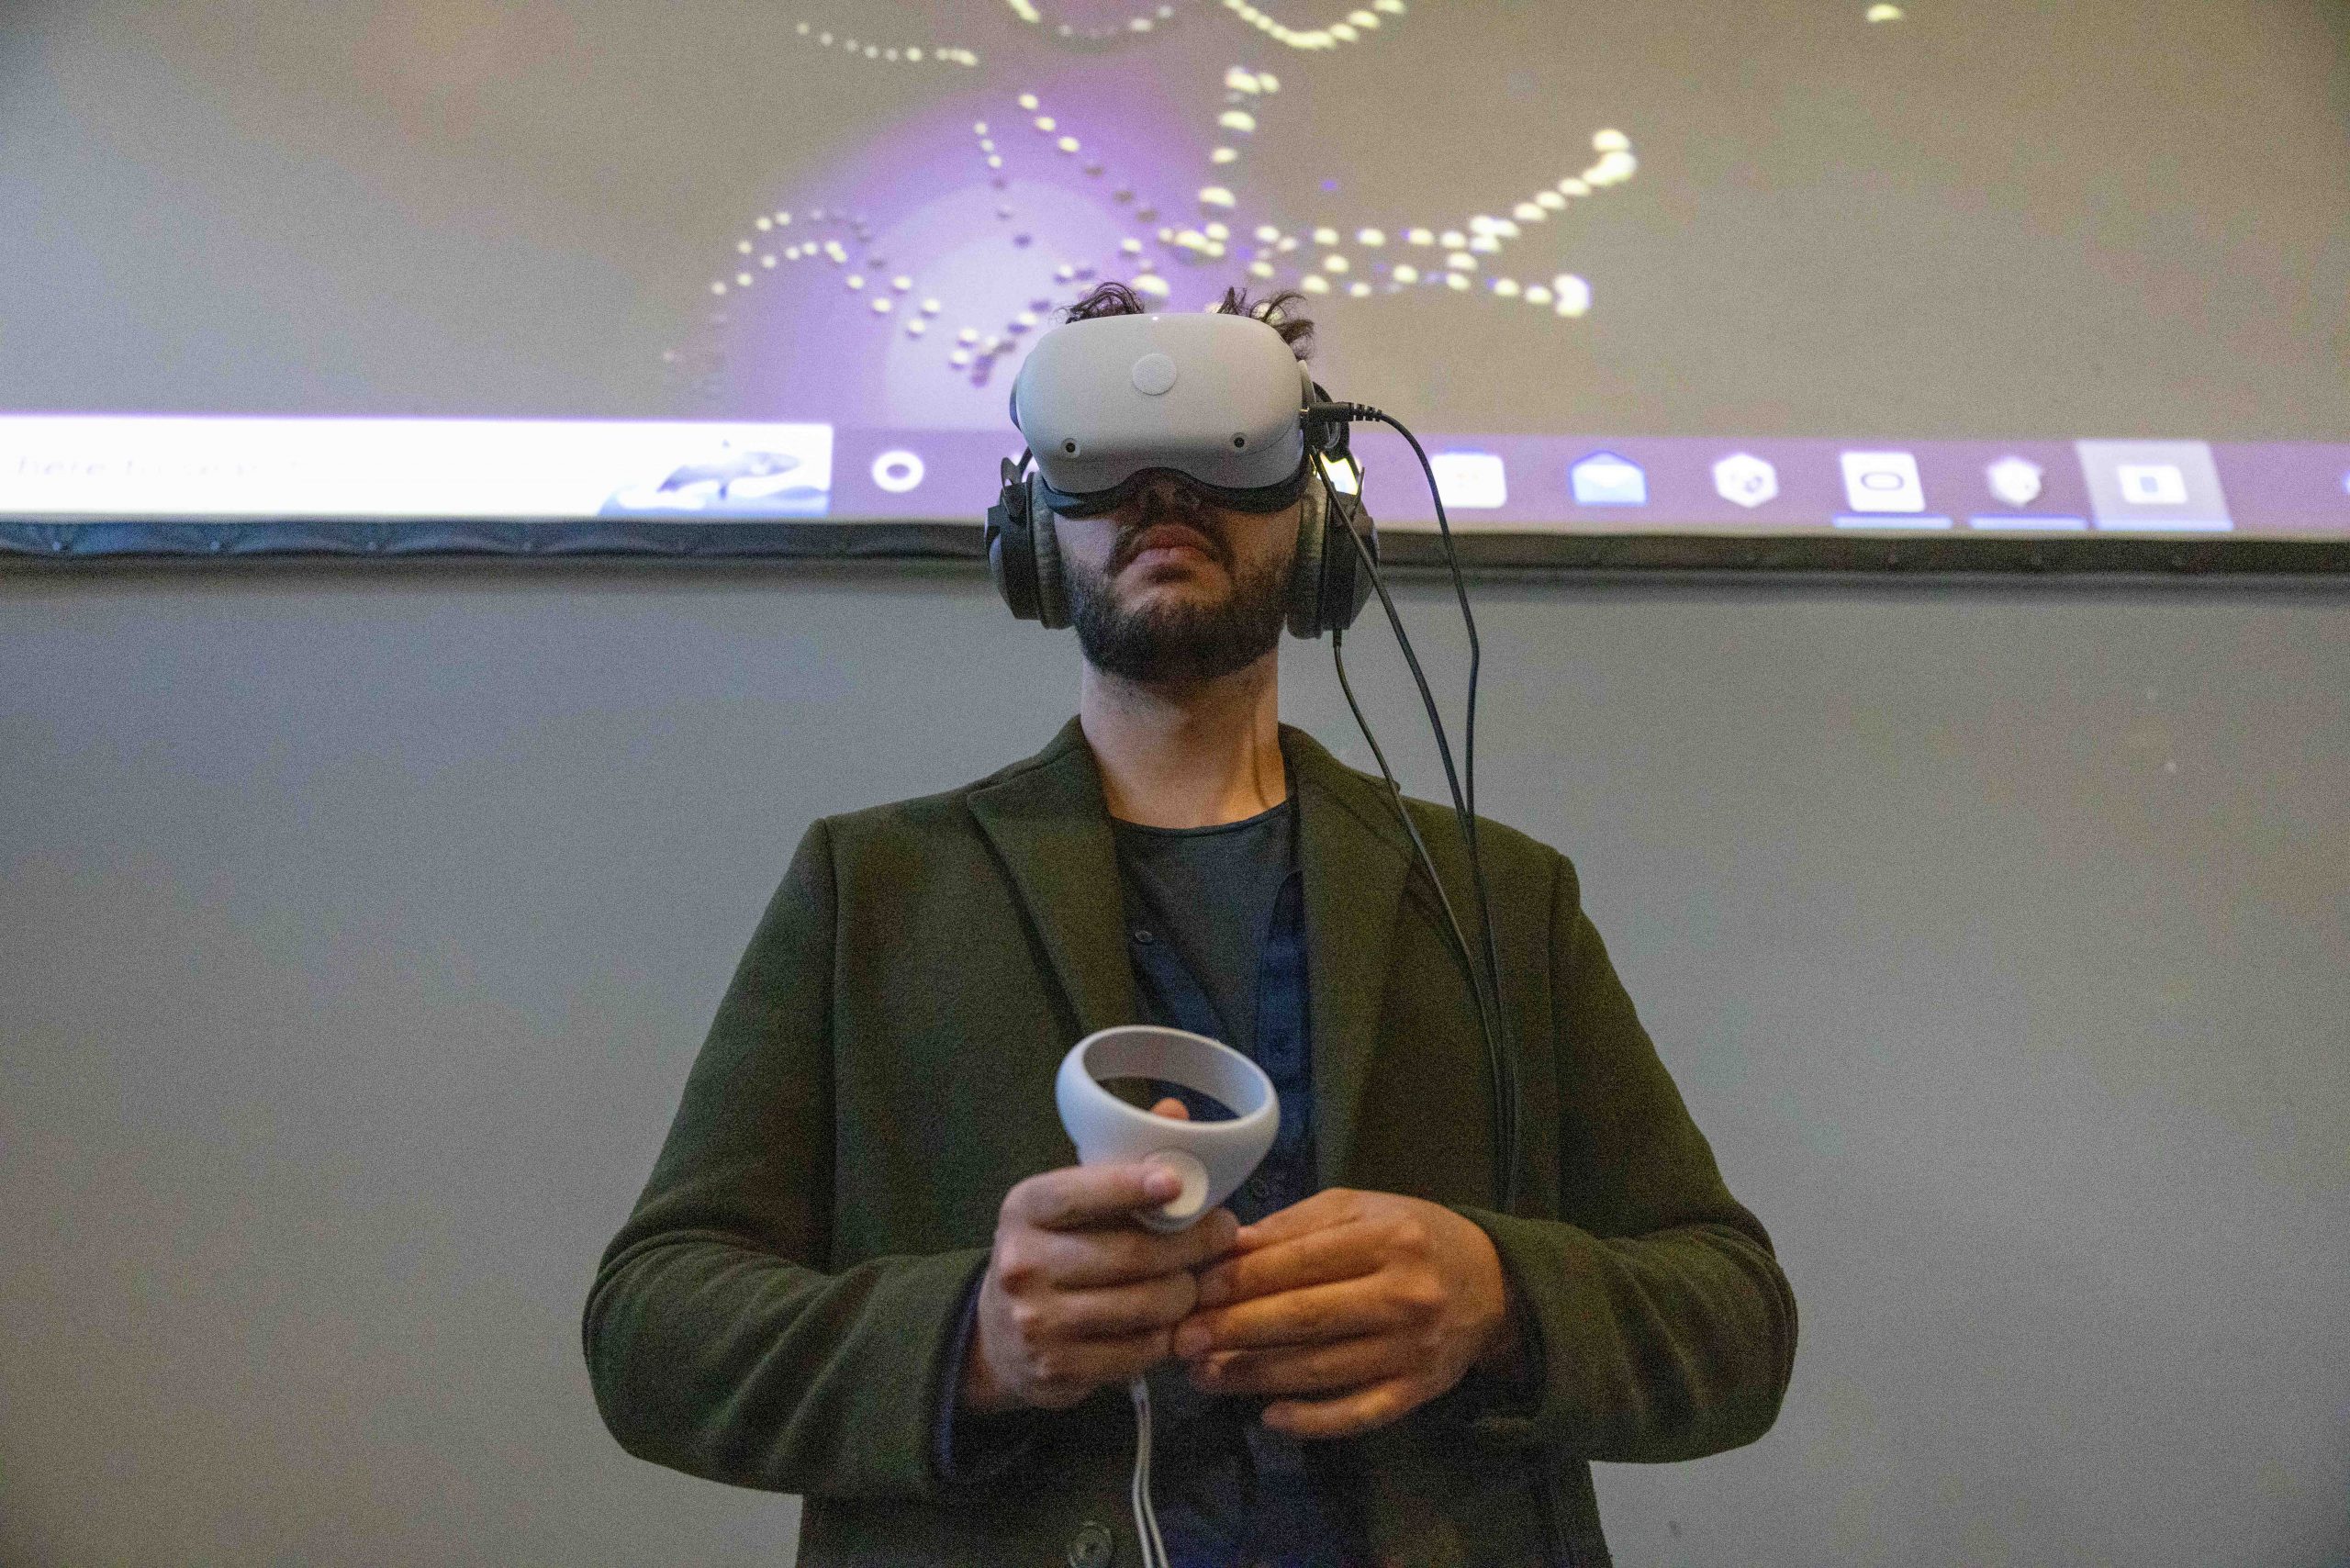 man wearing a virtual reality headset, holding a controller, looking upwards